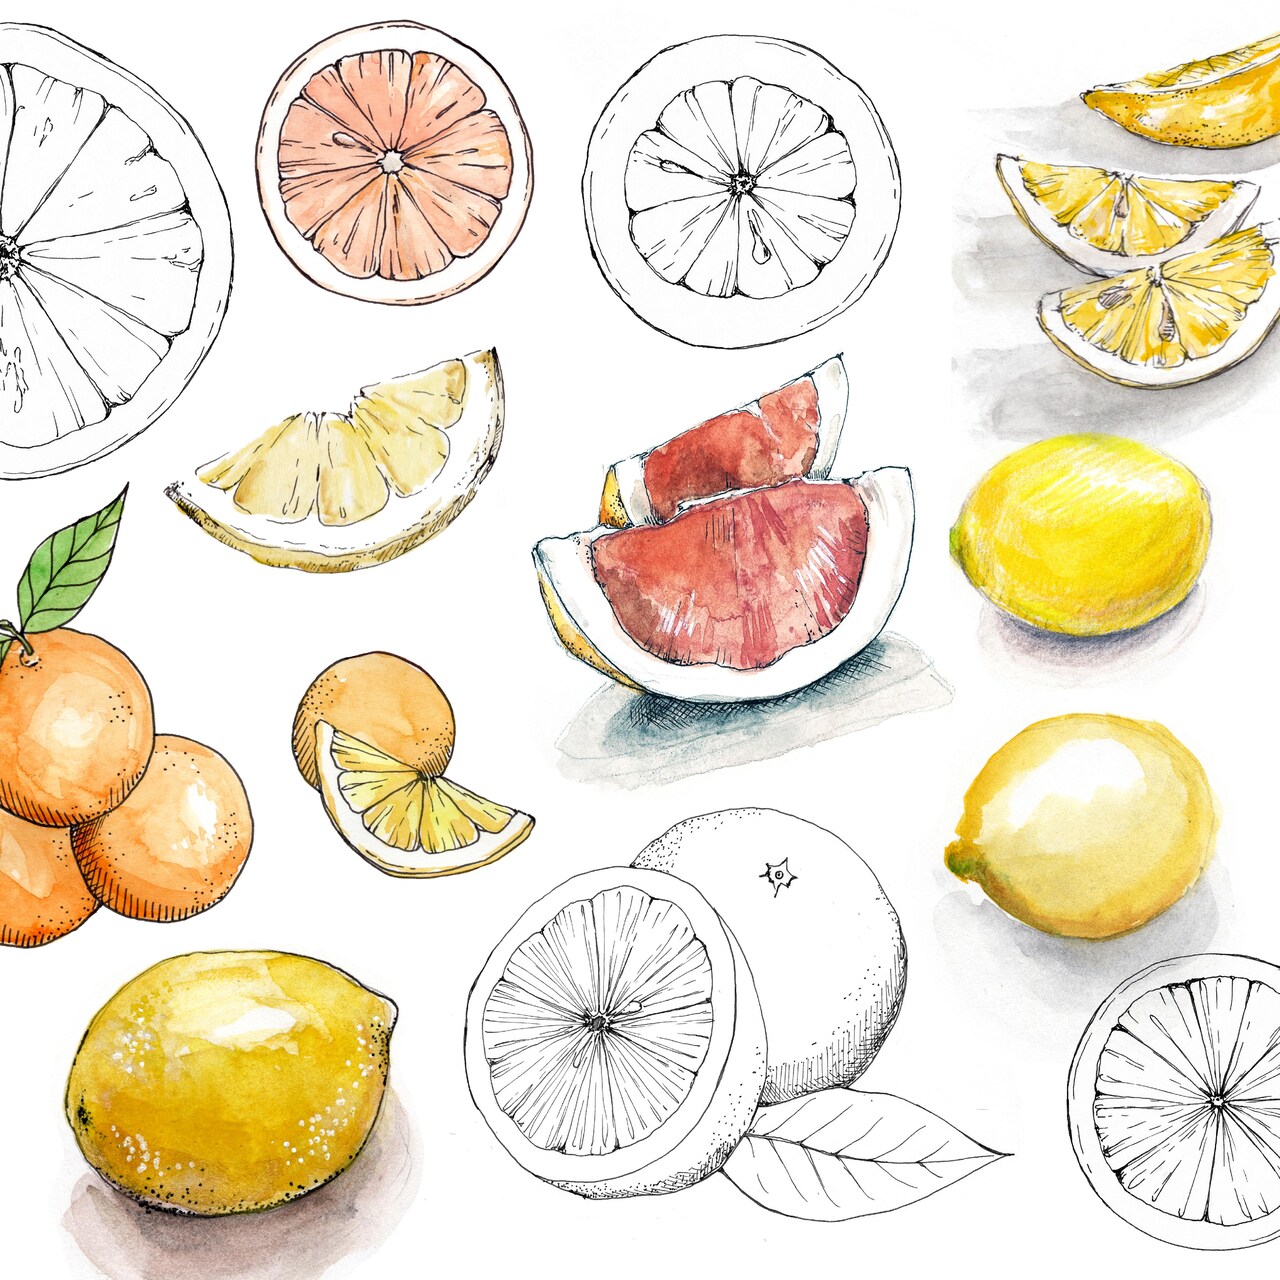 Sketch and Paint Citrus Fruits with Derwent